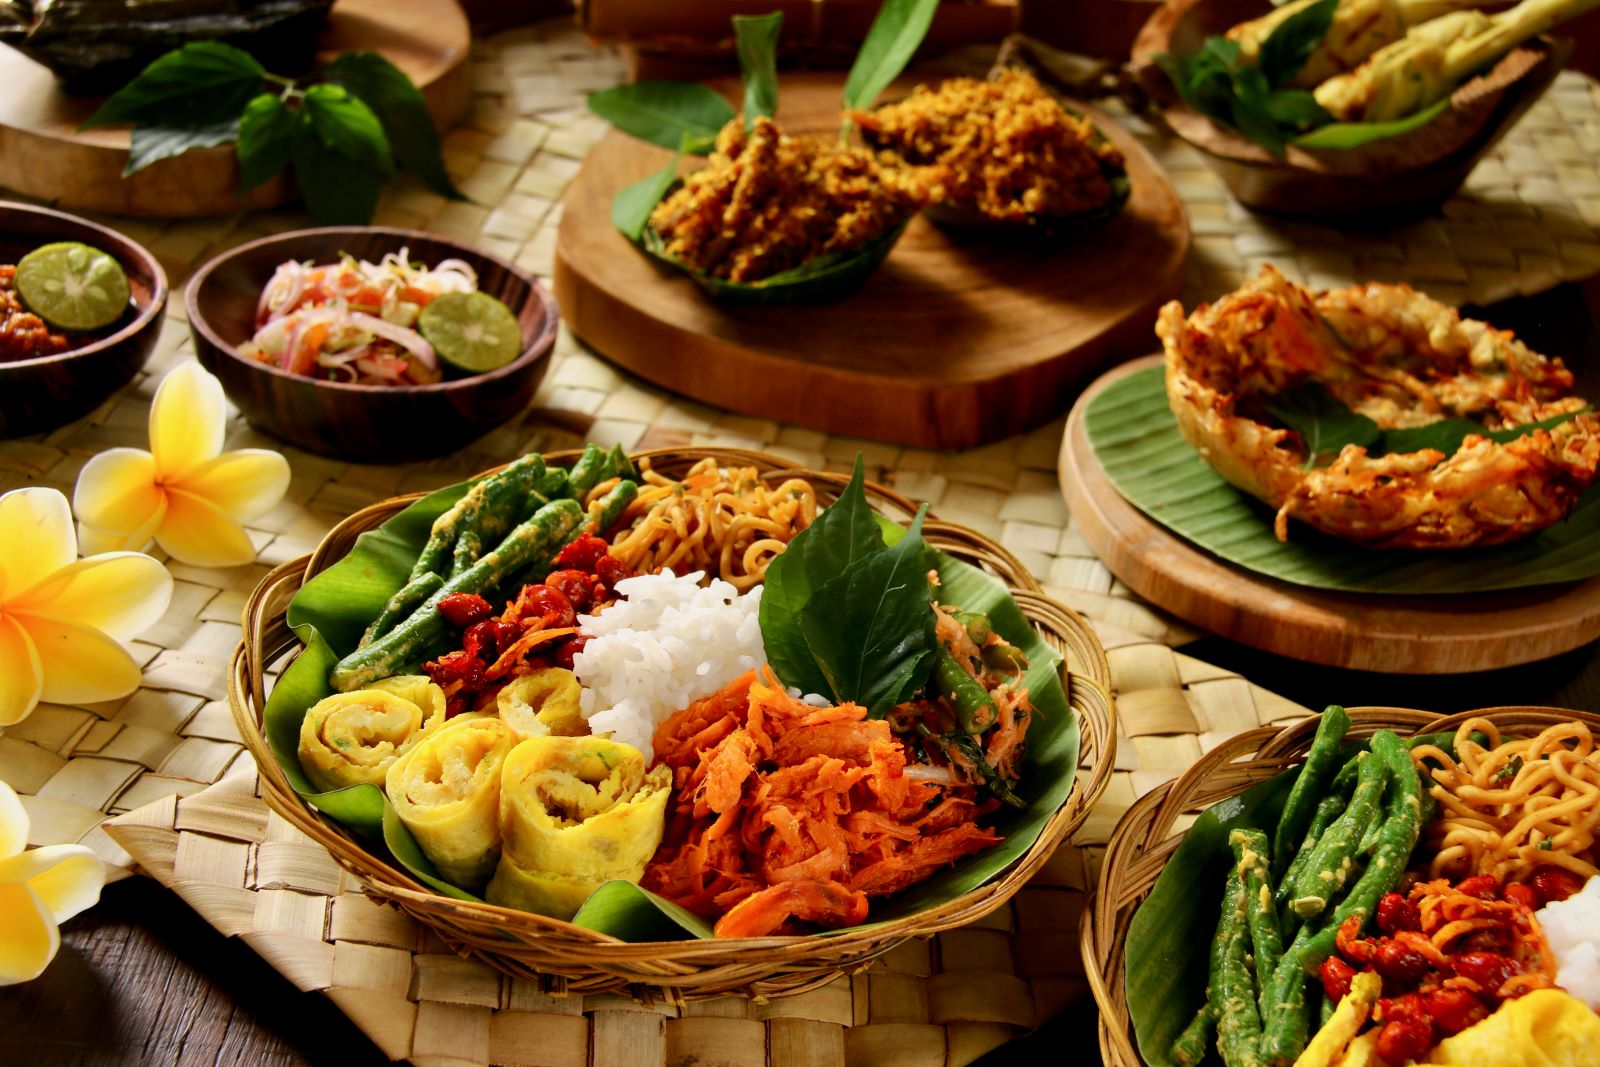 A selection of Balinese dishes